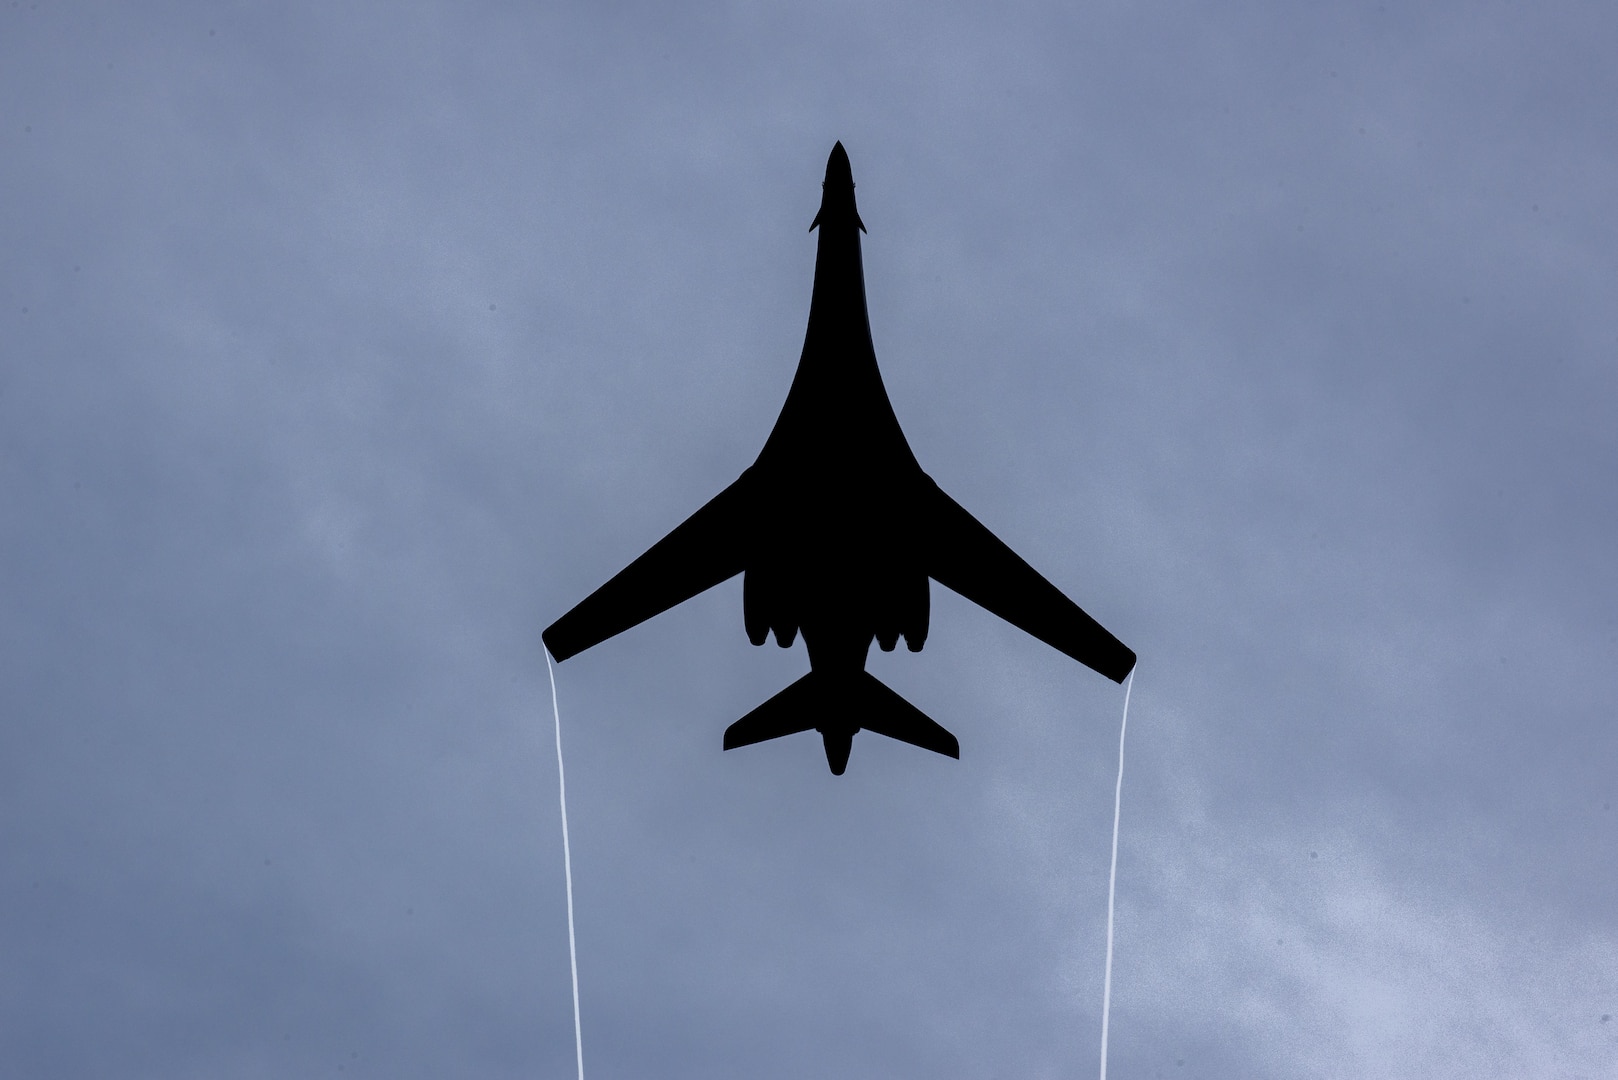 A B1-B Lancer assigned to the 9th Expeditionary Bomb Squadron flies over the 73rd Guam Liberation Day parade July 21, 2017, in Hagåtña, Guam. The parade commemorated 73 years since U.S. armed forces liberated the island from Japanese occupation. During World War II, Japan seized Guam on December 10, 1941, and on July 21, 1944, the U.S. armed forces liberated the island. (U.S. Air Force photo by Airman 1st Class Christopher Quail)